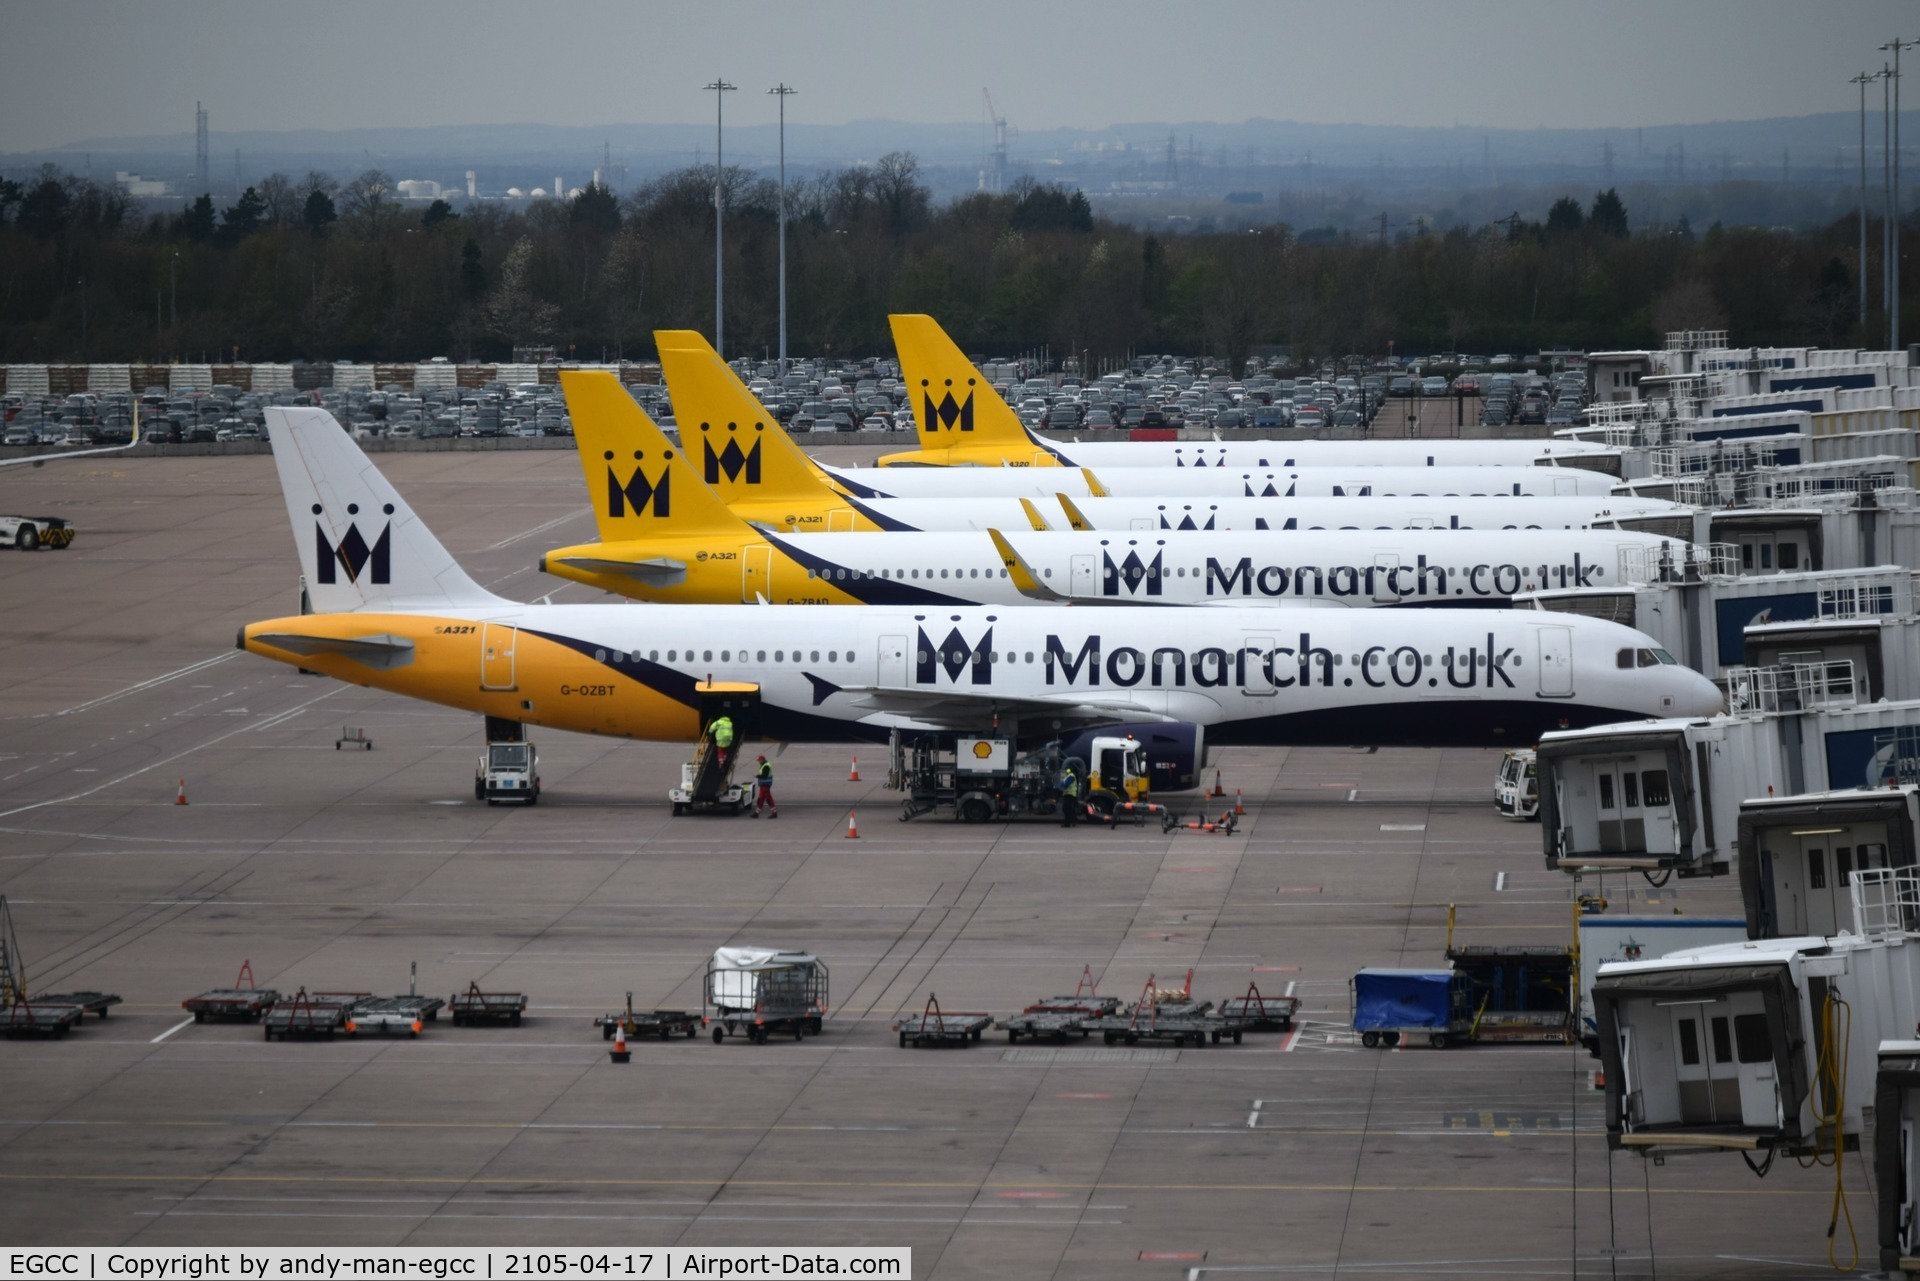 Manchester Airport, Manchester, England United Kingdom (EGCC) - 4 MON aircraft parked up on T2 waiting for there pax